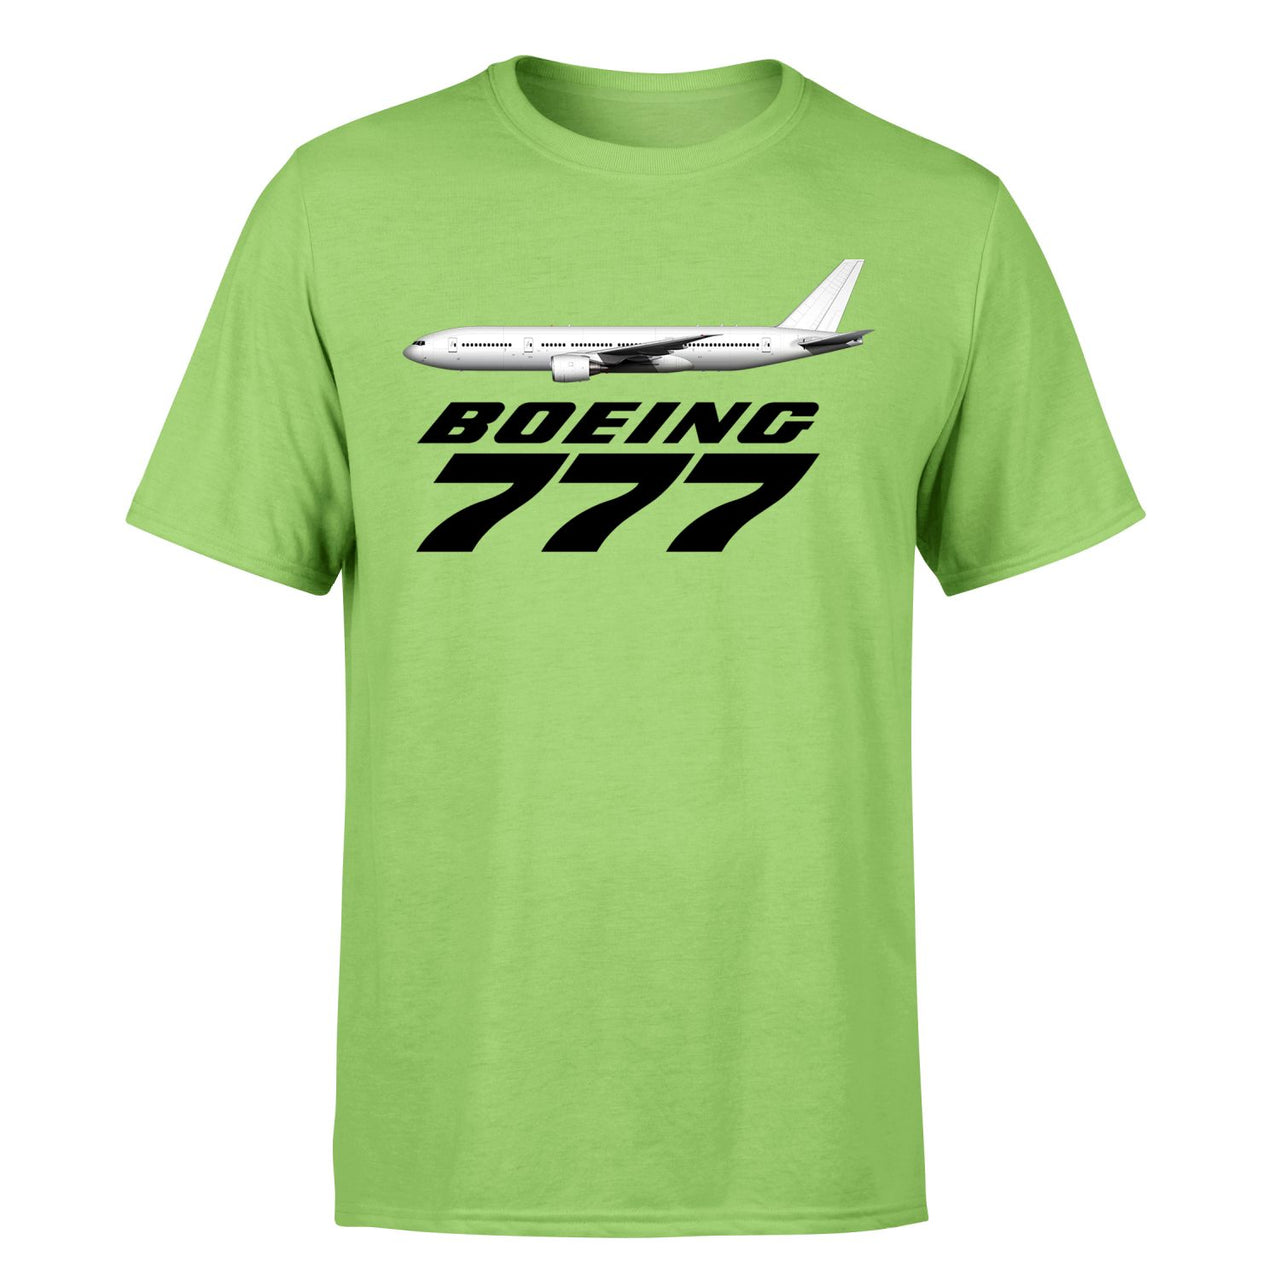 The Boeing 777 Designed T-Shirts